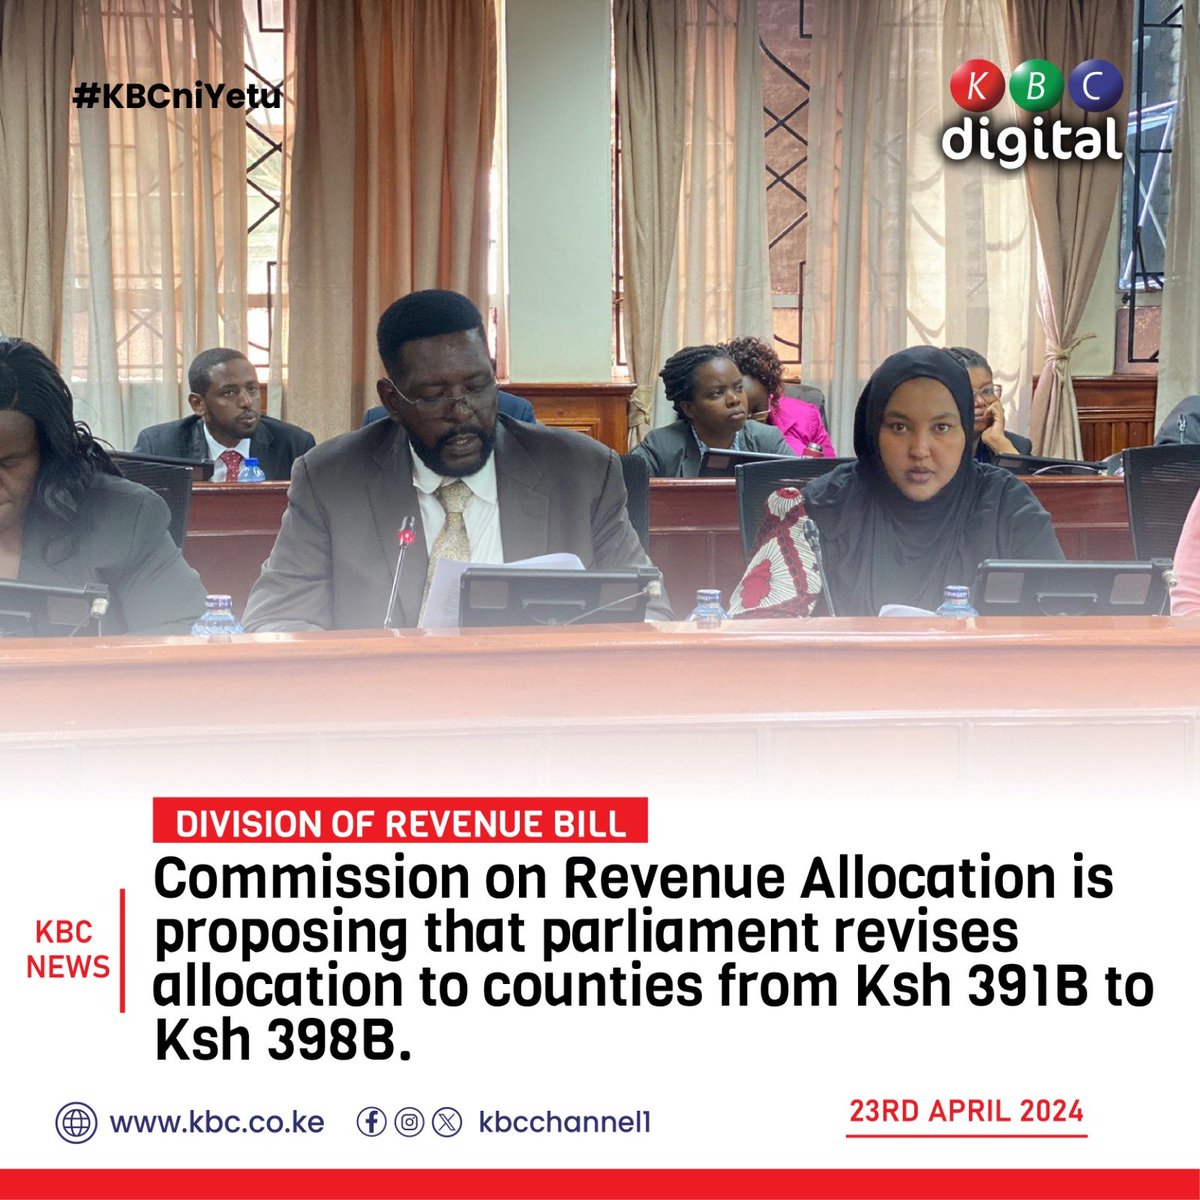 Commission on Revenue Allocation is proposing that parliament revises allocation to counties from Ksh 391B to Ksh 398B. #KBCniYetu ^RO